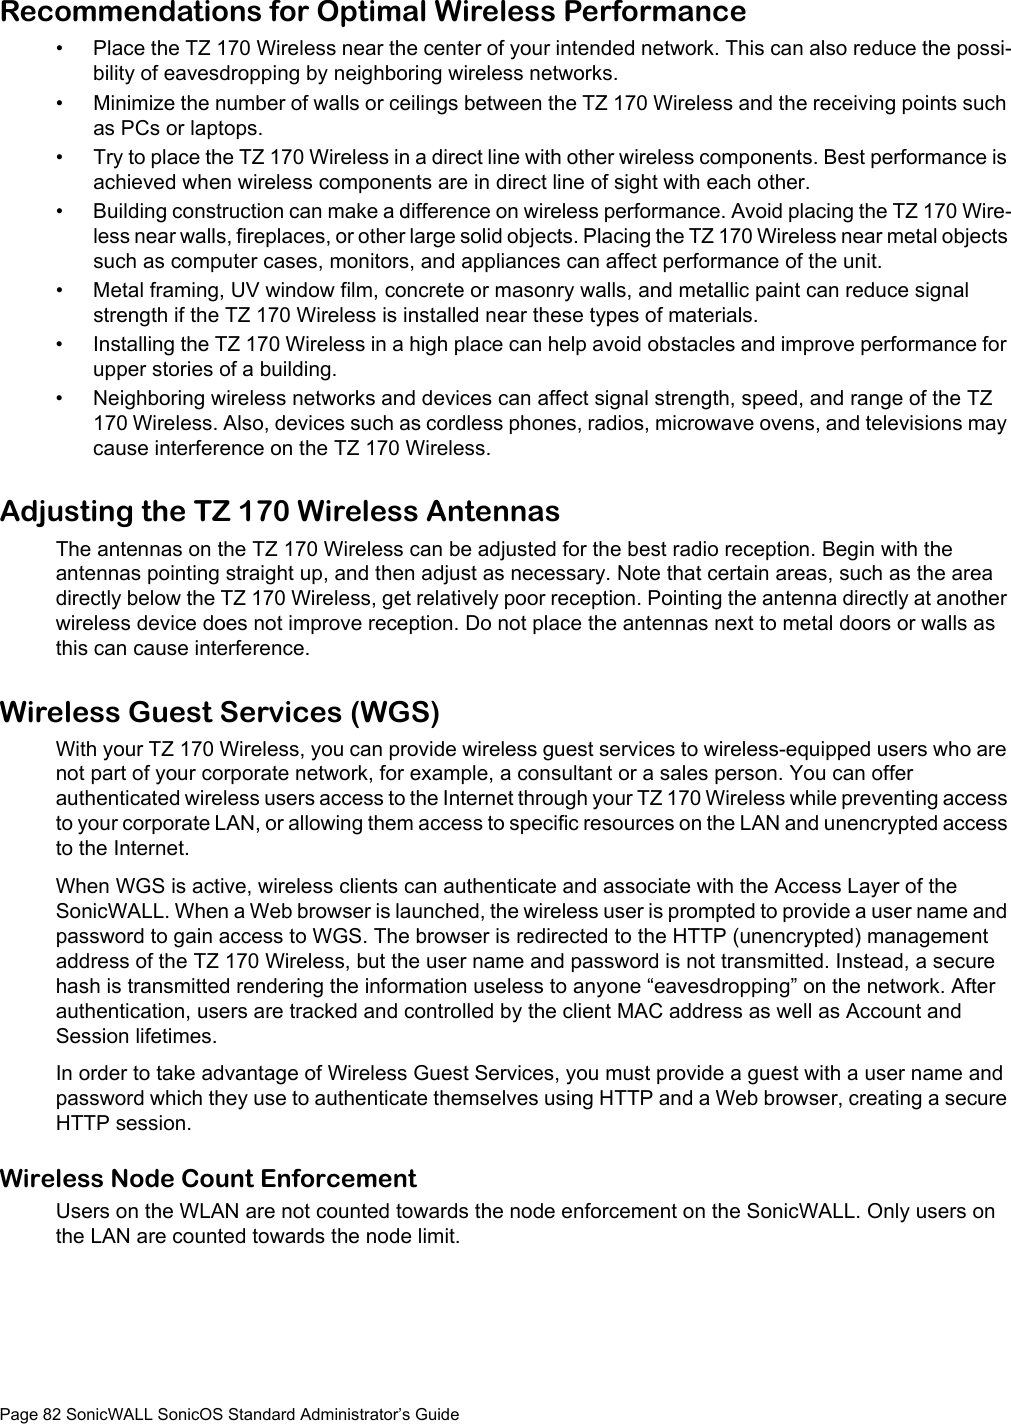 Page 82 SonicWALL SonicOS Standard Administrator’s GuideRecommendations for Optimal Wireless Performance• Place the TZ 170 Wireless near the center of your intended network. This can also reduce the possi-bility of eavesdropping by neighboring wireless networks. • Minimize the number of walls or ceilings between the TZ 170 Wireless and the receiving points such as PCs or laptops. • Try to place the TZ 170 Wireless in a direct line with other wireless components. Best performance is achieved when wireless components are in direct line of sight with each other. • Building construction can make a difference on wireless performance. Avoid placing the TZ 170 Wire-less near walls, fireplaces, or other large solid objects. Placing the TZ 170 Wireless near metal objects such as computer cases, monitors, and appliances can affect performance of the unit. • Metal framing, UV window film, concrete or masonry walls, and metallic paint can reduce signal strength if the TZ 170 Wireless is installed near these types of materials. • Installing the TZ 170 Wireless in a high place can help avoid obstacles and improve performance for upper stories of a building. • Neighboring wireless networks and devices can affect signal strength, speed, and range of the TZ 170 Wireless. Also, devices such as cordless phones, radios, microwave ovens, and televisions may cause interference on the TZ 170 Wireless. Adjusting the TZ 170 Wireless AntennasThe antennas on the TZ 170 Wireless can be adjusted for the best radio reception. Begin with the antennas pointing straight up, and then adjust as necessary. Note that certain areas, such as the area directly below the TZ 170 Wireless, get relatively poor reception. Pointing the antenna directly at another wireless device does not improve reception. Do not place the antennas next to metal doors or walls as this can cause interference. Wireless Guest Services (WGS)With your TZ 170 Wireless, you can provide wireless guest services to wireless-equipped users who are not part of your corporate network, for example, a consultant or a sales person. You can offer authenticated wireless users access to the Internet through your TZ 170 Wireless while preventing access to your corporate LAN, or allowing them access to specific resources on the LAN and unencrypted access to the Internet. When WGS is active, wireless clients can authenticate and associate with the Access Layer of the SonicWALL. When a Web browser is launched, the wireless user is prompted to provide a user name and password to gain access to WGS. The browser is redirected to the HTTP (unencrypted) management address of the TZ 170 Wireless, but the user name and password is not transmitted. Instead, a secure hash is transmitted rendering the information useless to anyone “eavesdropping” on the network. After authentication, users are tracked and controlled by the client MAC address as well as Account and Session lifetimes. In order to take advantage of Wireless Guest Services, you must provide a guest with a user name and password which they use to authenticate themselves using HTTP and a Web browser, creating a secure HTTP session. Wireless Node Count EnforcementUsers on the WLAN are not counted towards the node enforcement on the SonicWALL. Only users on the LAN are counted towards the node limit. 